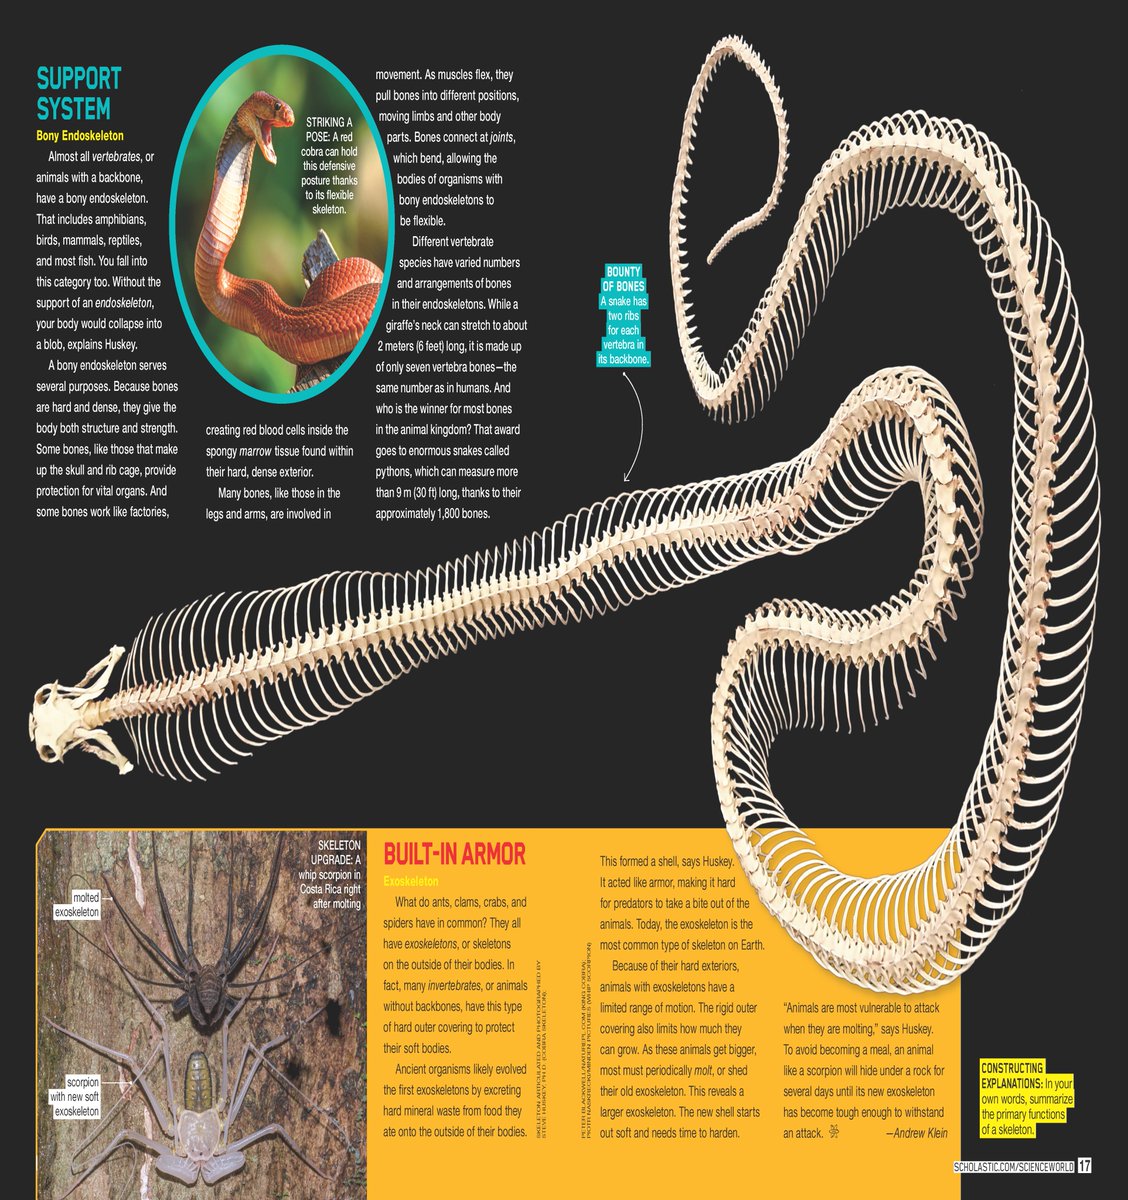 Dr. Steve Huskey featured skeletons and quotes with @Scholastic in a recent magazine edition. #becausescience #biology #skeletons #wkubiology #scholastic #functionalmorphology